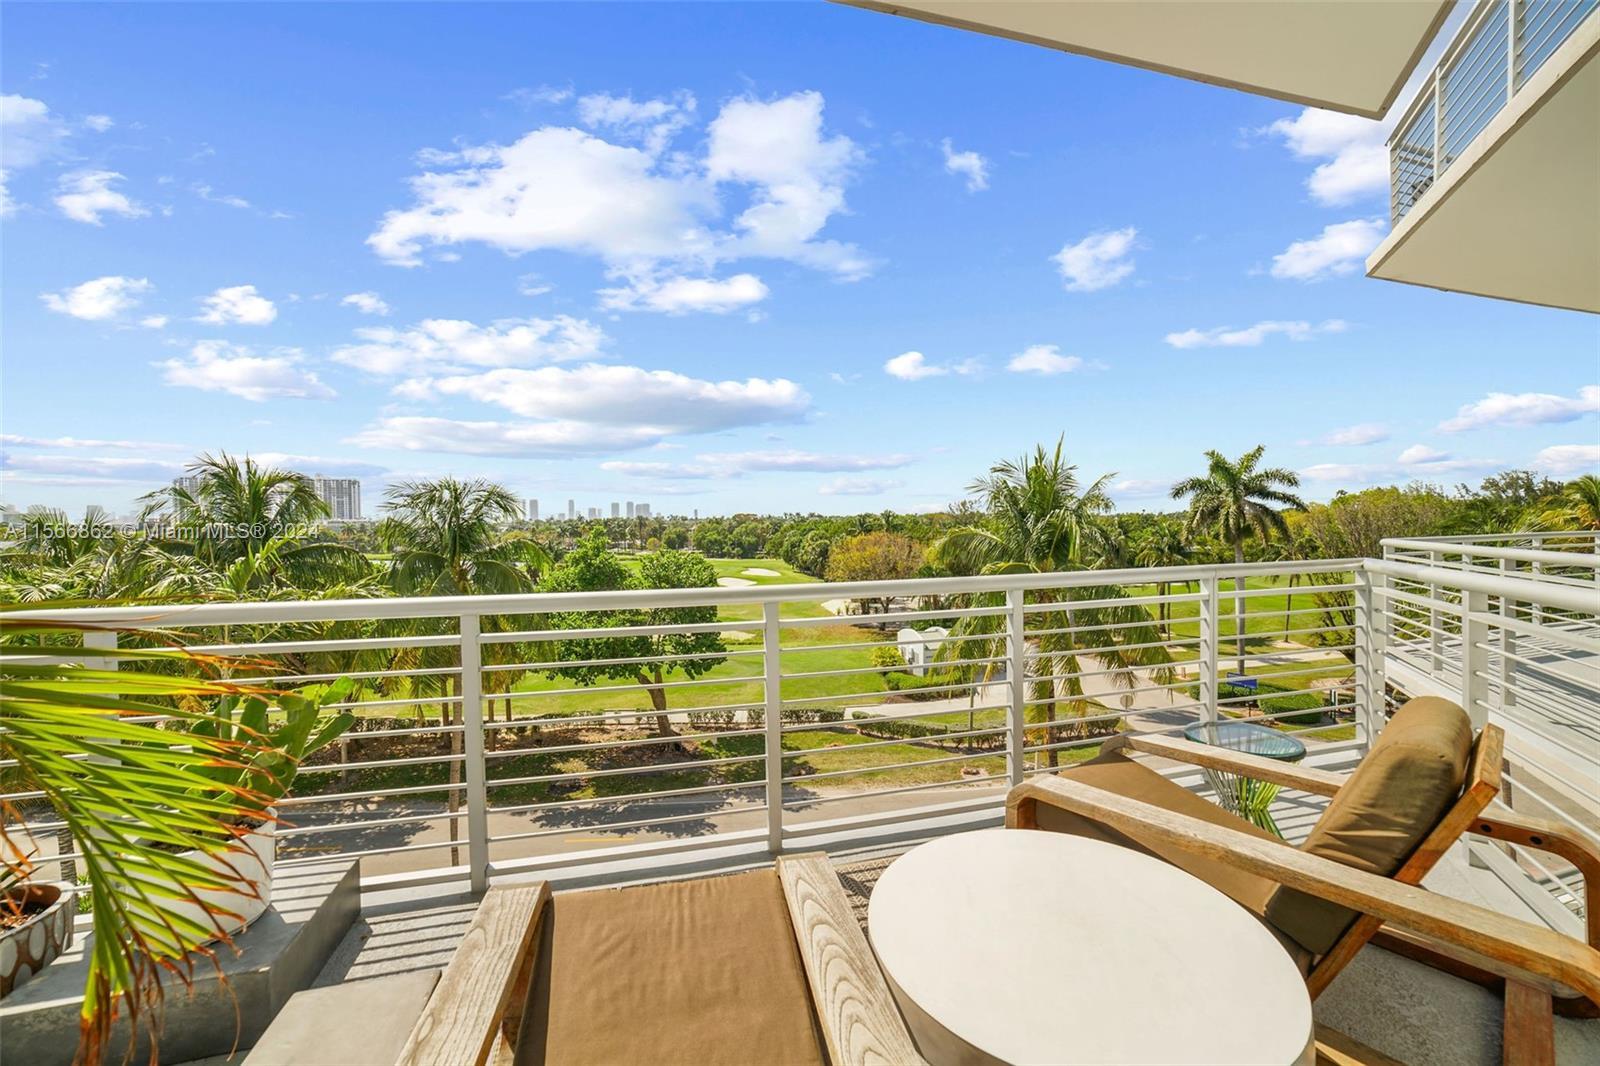 Indulge in the ultimate Miami Beach lifestyle with this unique 2-bedroom, 2.5-bathroom loft-style re